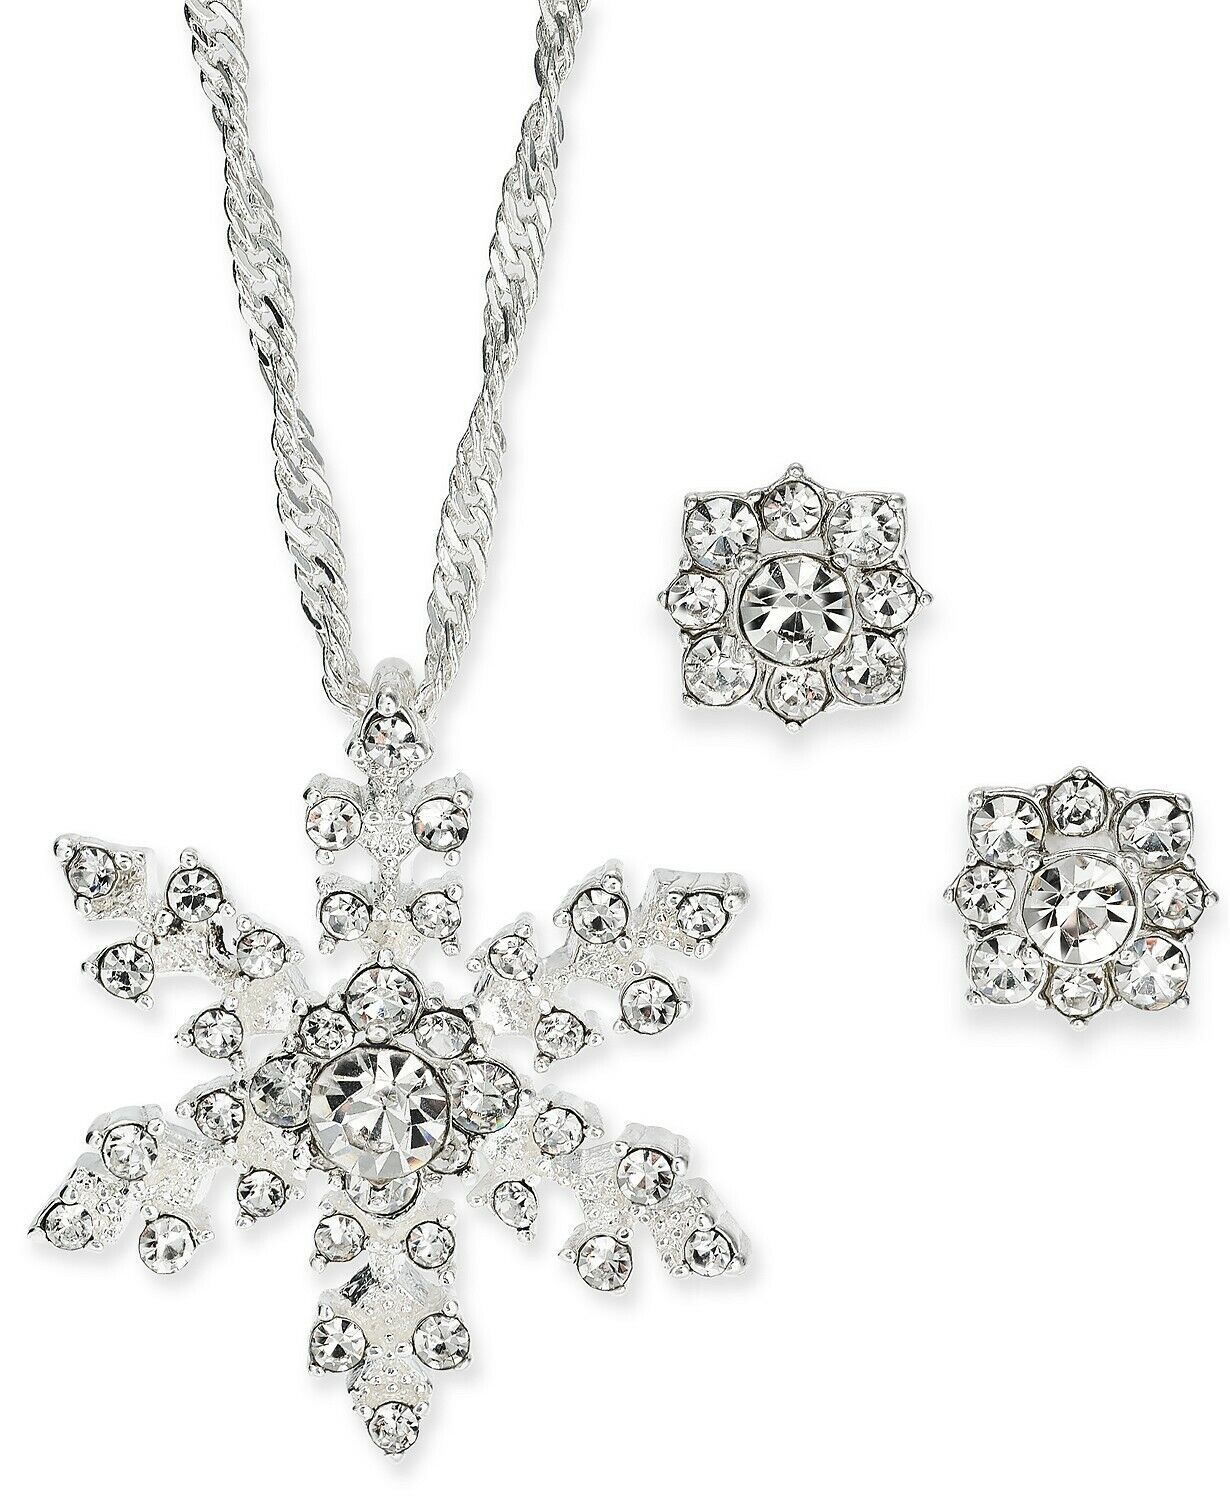 Charter Club Women's Two Piece Crystal Snowflake Necklace & Earring Gift Set NIB - $14.99